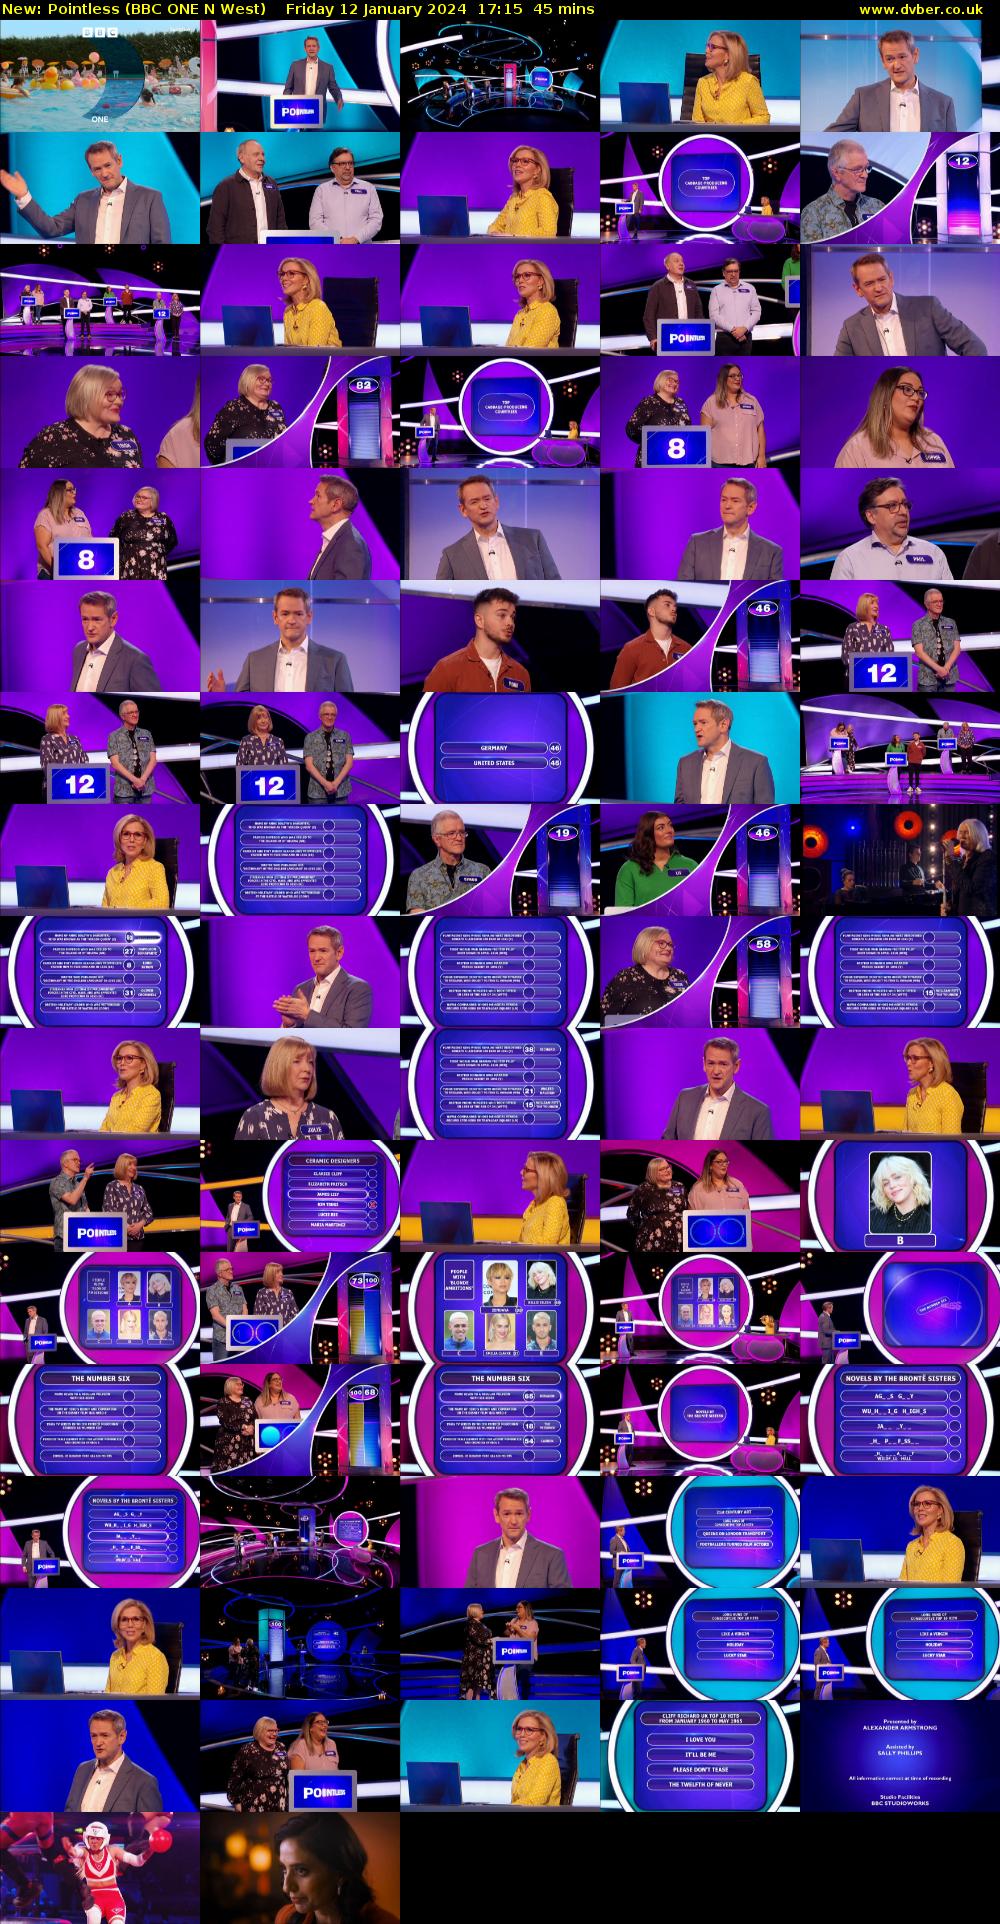 Pointless (BBC ONE N West) Friday 12 January 2024 17:15 - 18:00